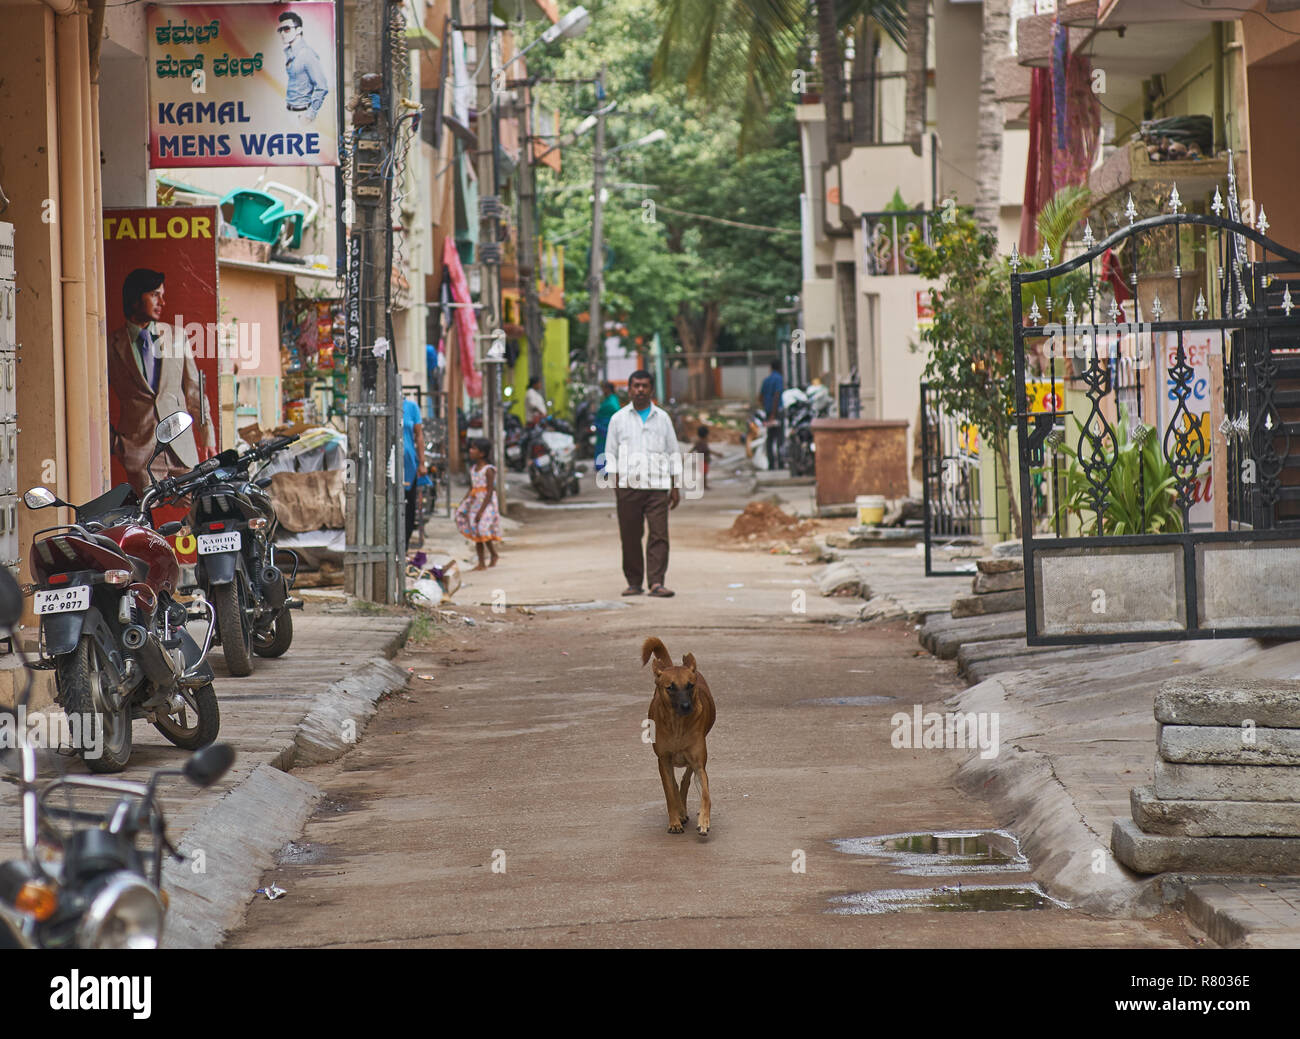 A dog and a man on a small street in downtown Bangalore. Stock Photo